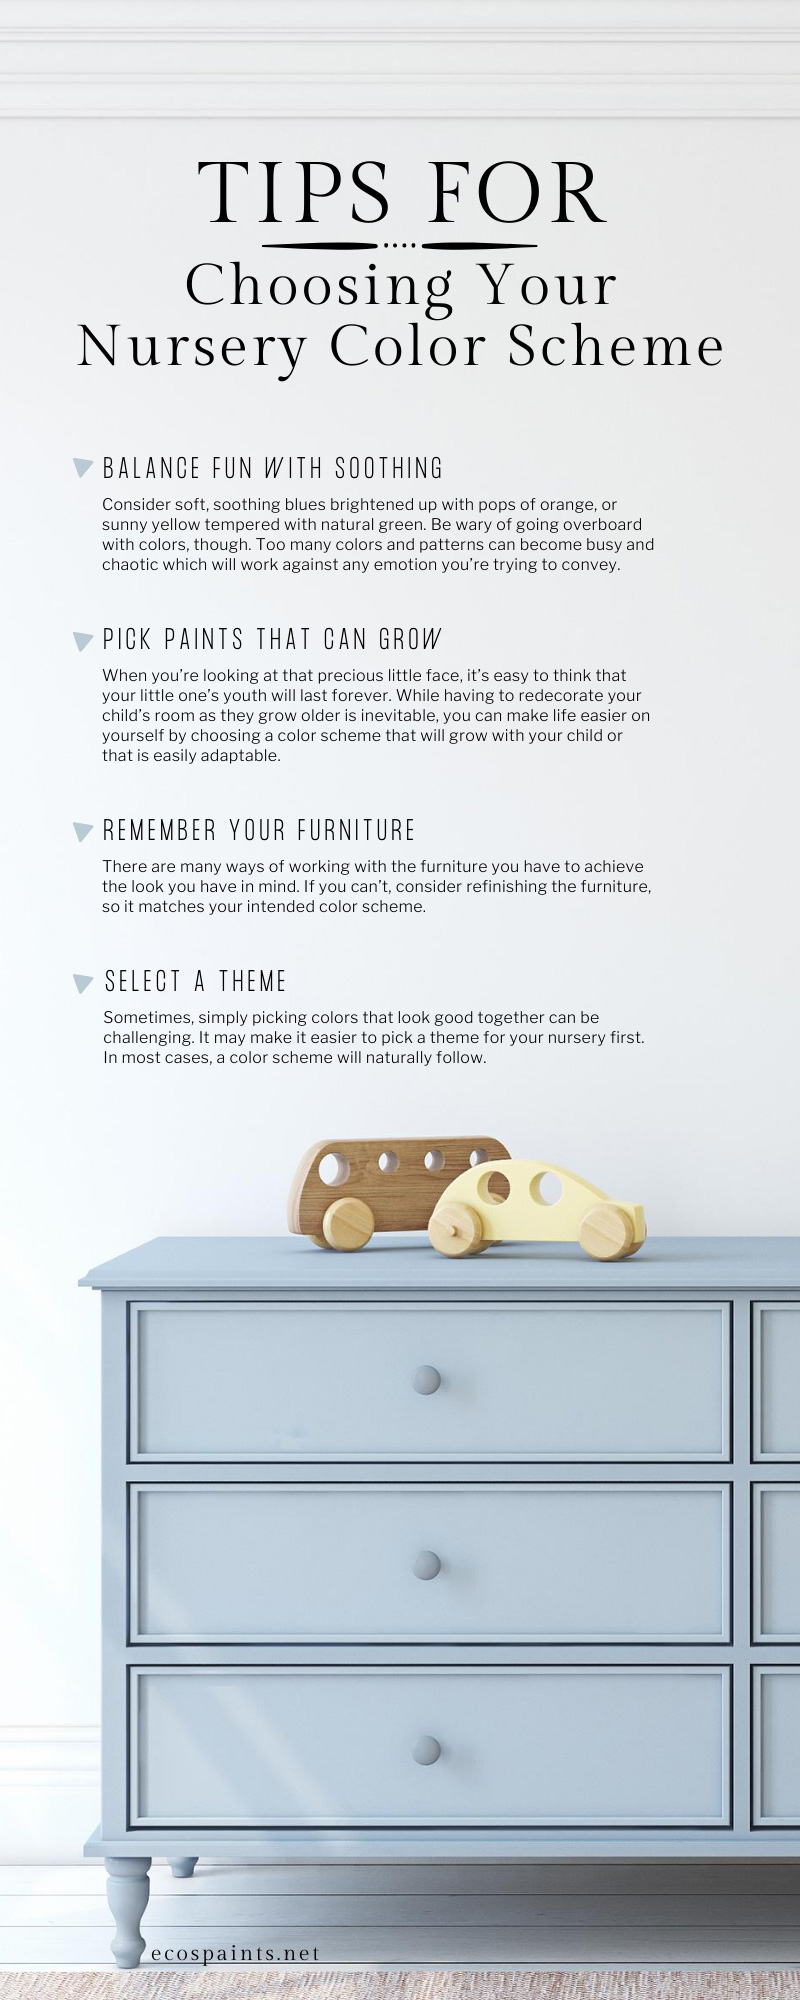 Tips for Choosing Your Nursery Color Scheme
